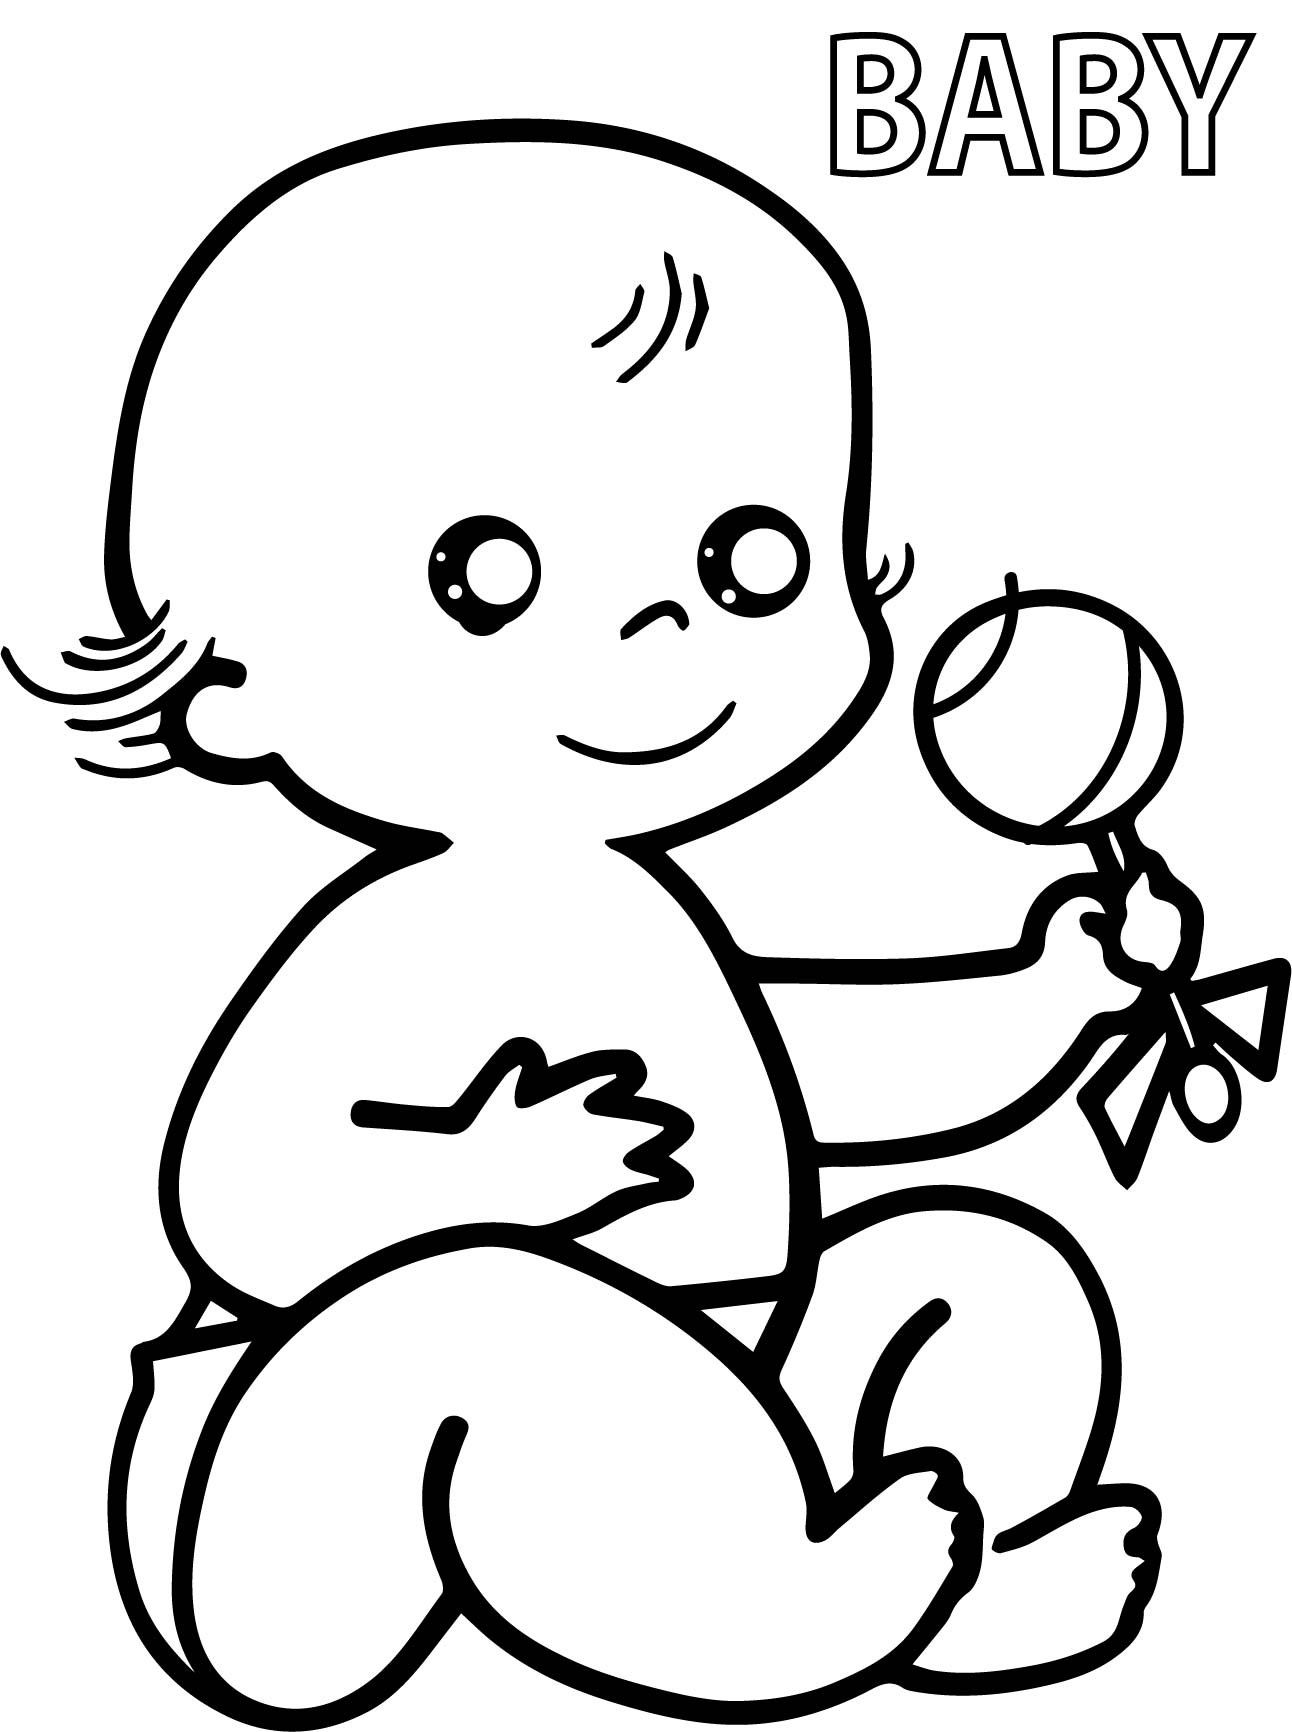 Baby Coloring Picture
 Preschool Baby Coloring Pages